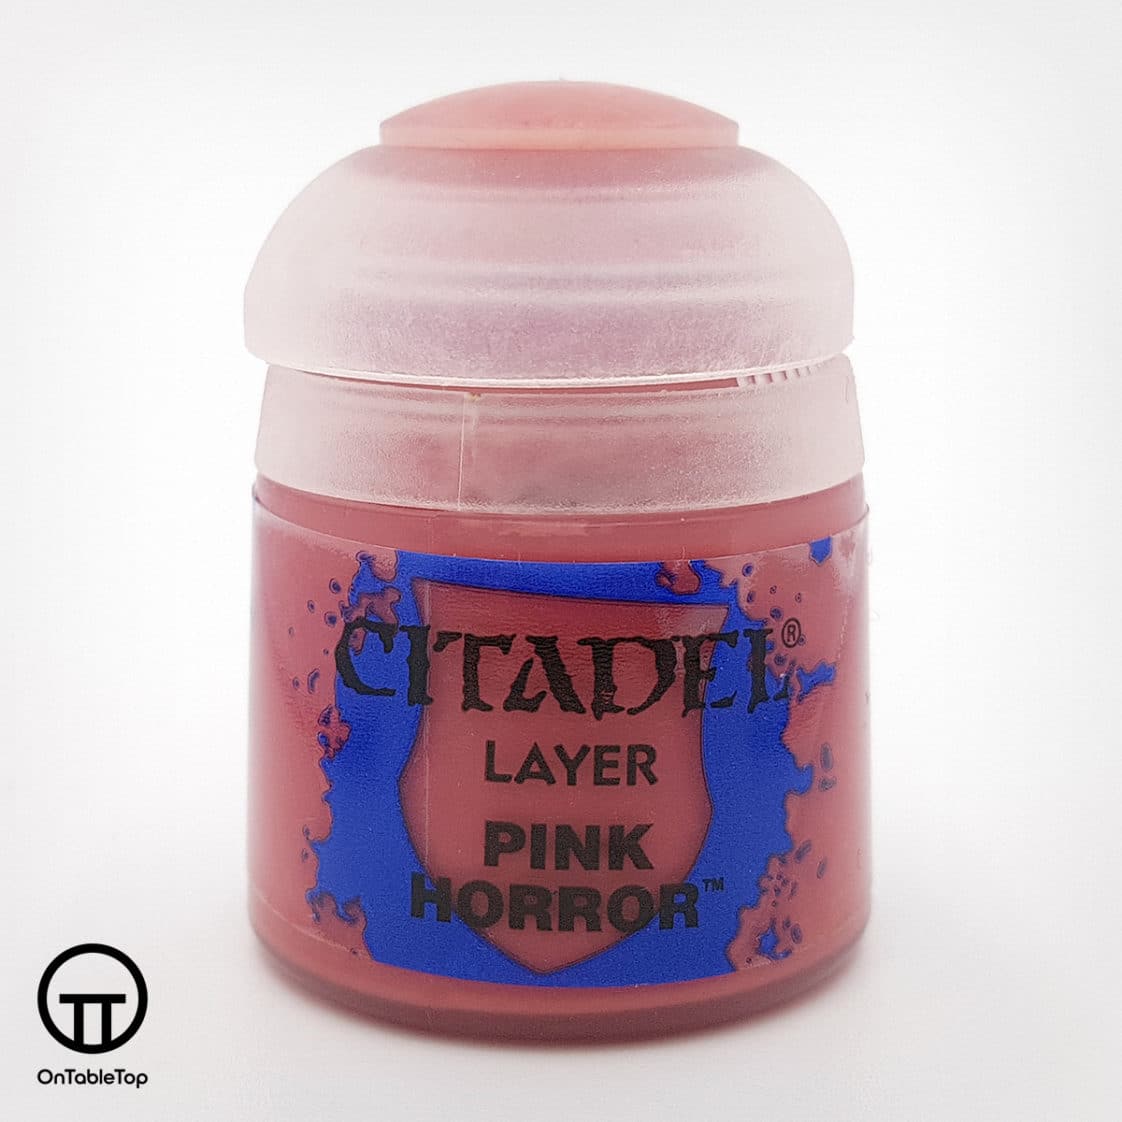 Pink Horror (12ml) – Page 362610207495524851 – OnTableTop Store